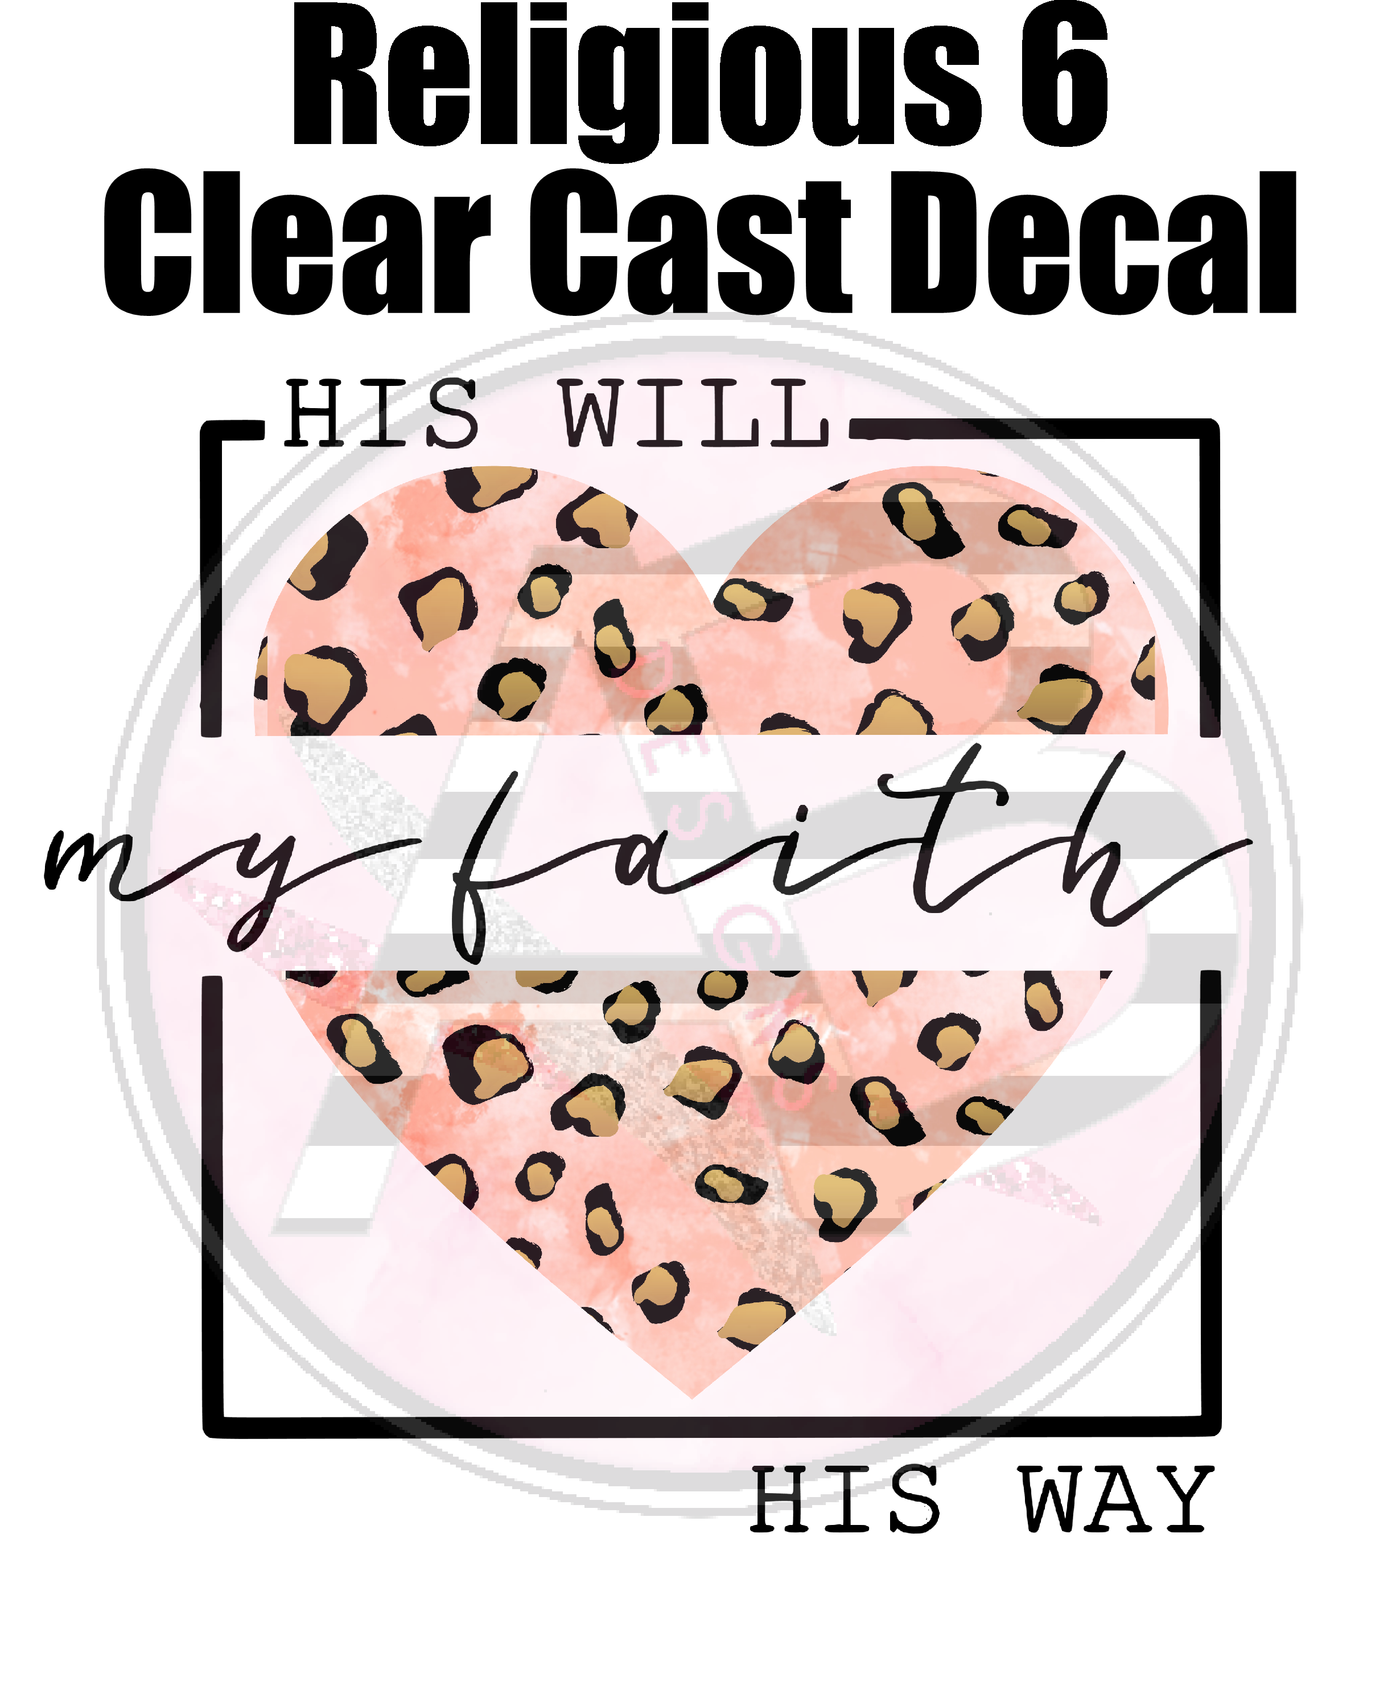 Religious 6 - Clear Cast Decal